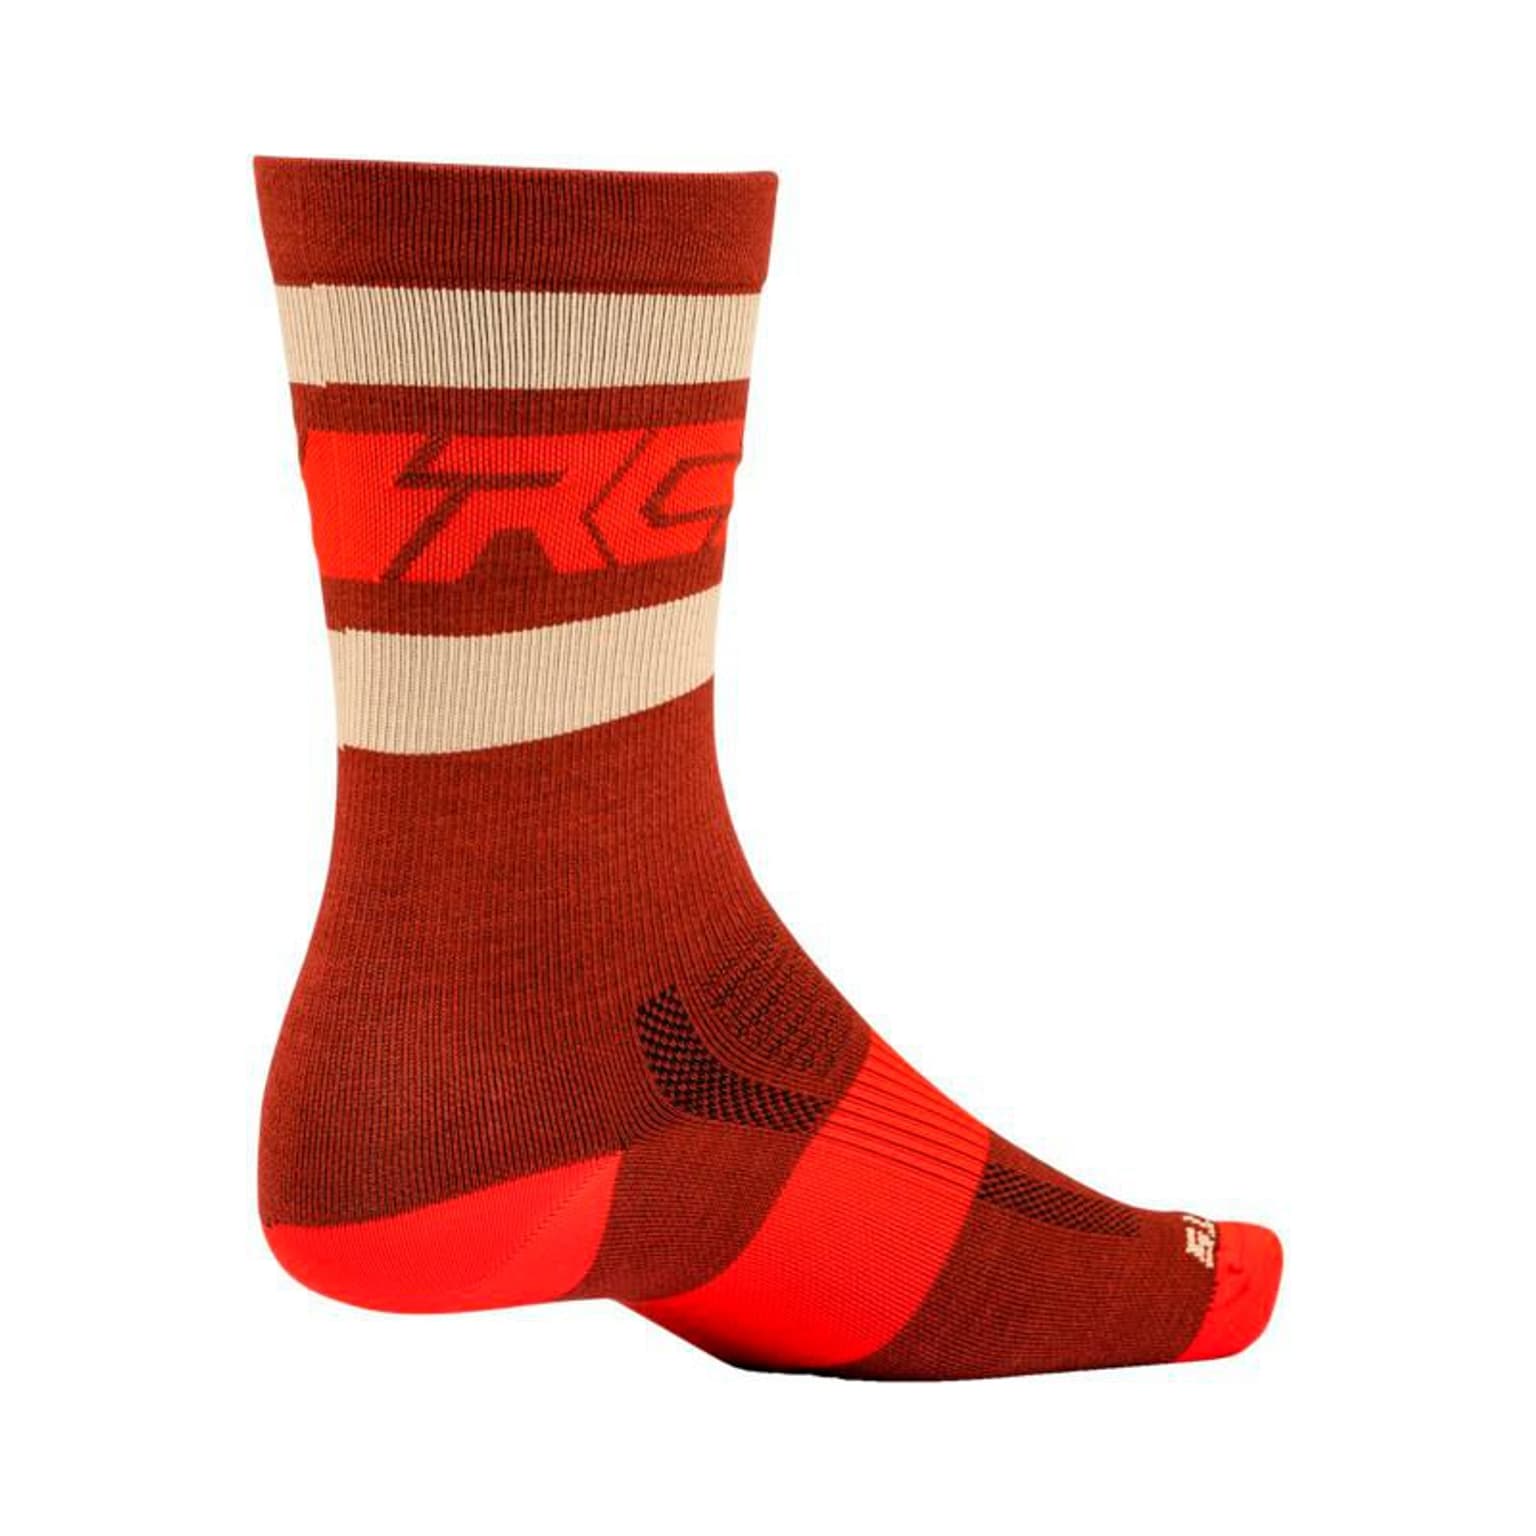 Ride Concepts Ride Concepts Woll Fifty-Fifty Chaussettes de vélo rouge 2